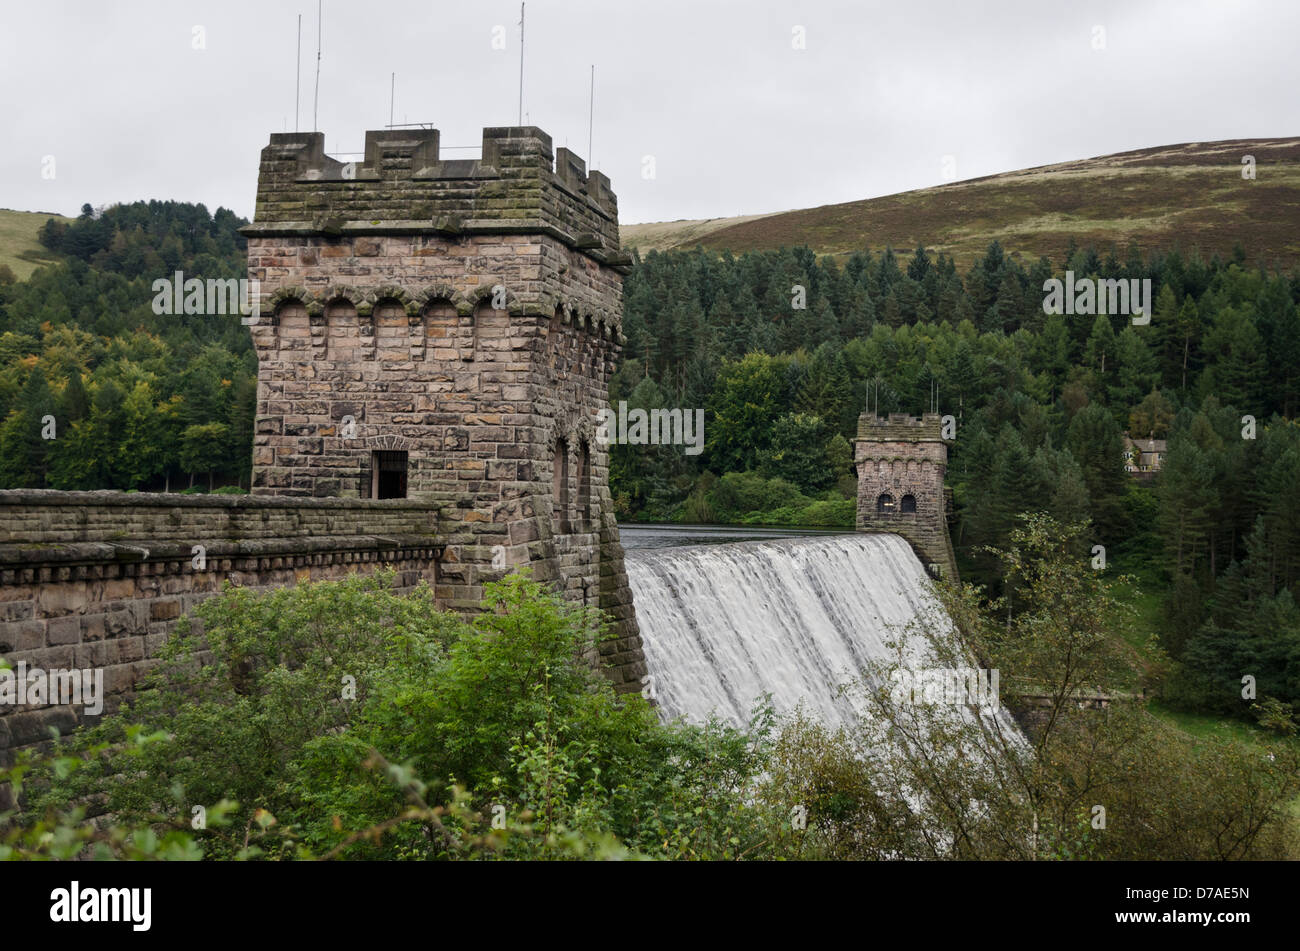 Looking across the Derwent Dam wall, with the reservoir over flowing Stock Photo